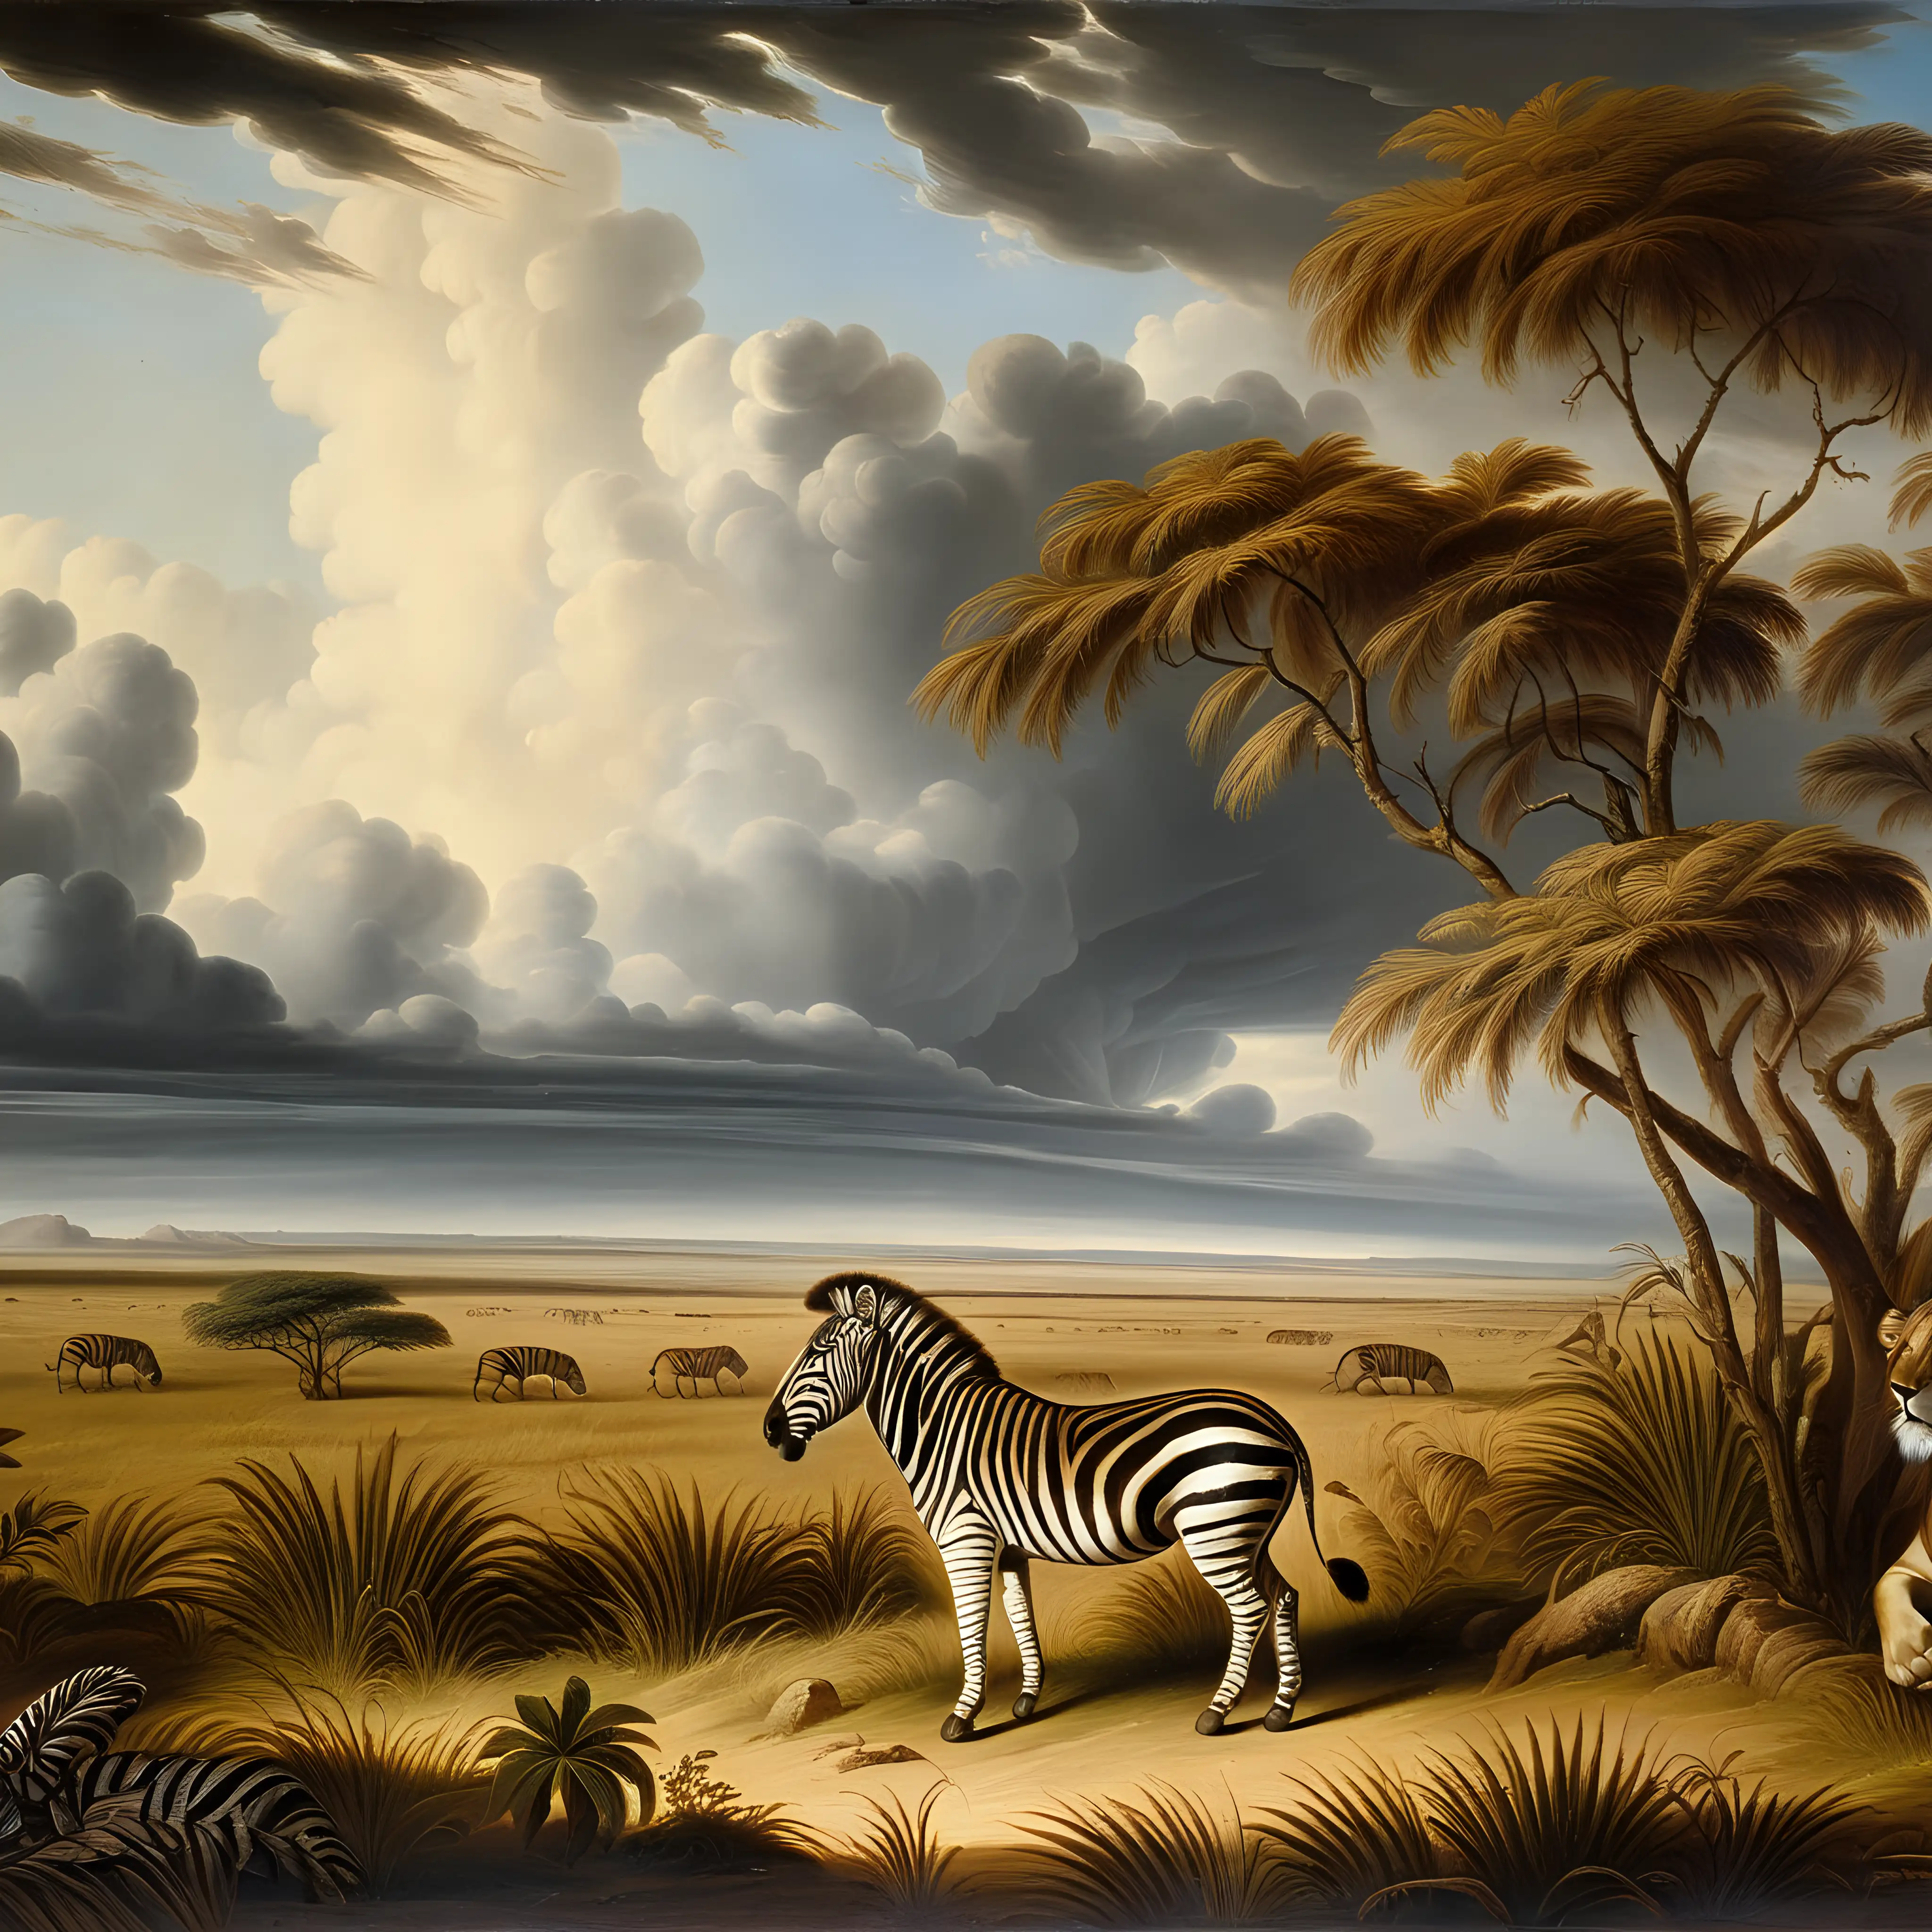 Zebra hiding in a savanna. Dramatic coloring. Vast sky. Lion on the hunt hiding in background. 1800's Oil painting. 